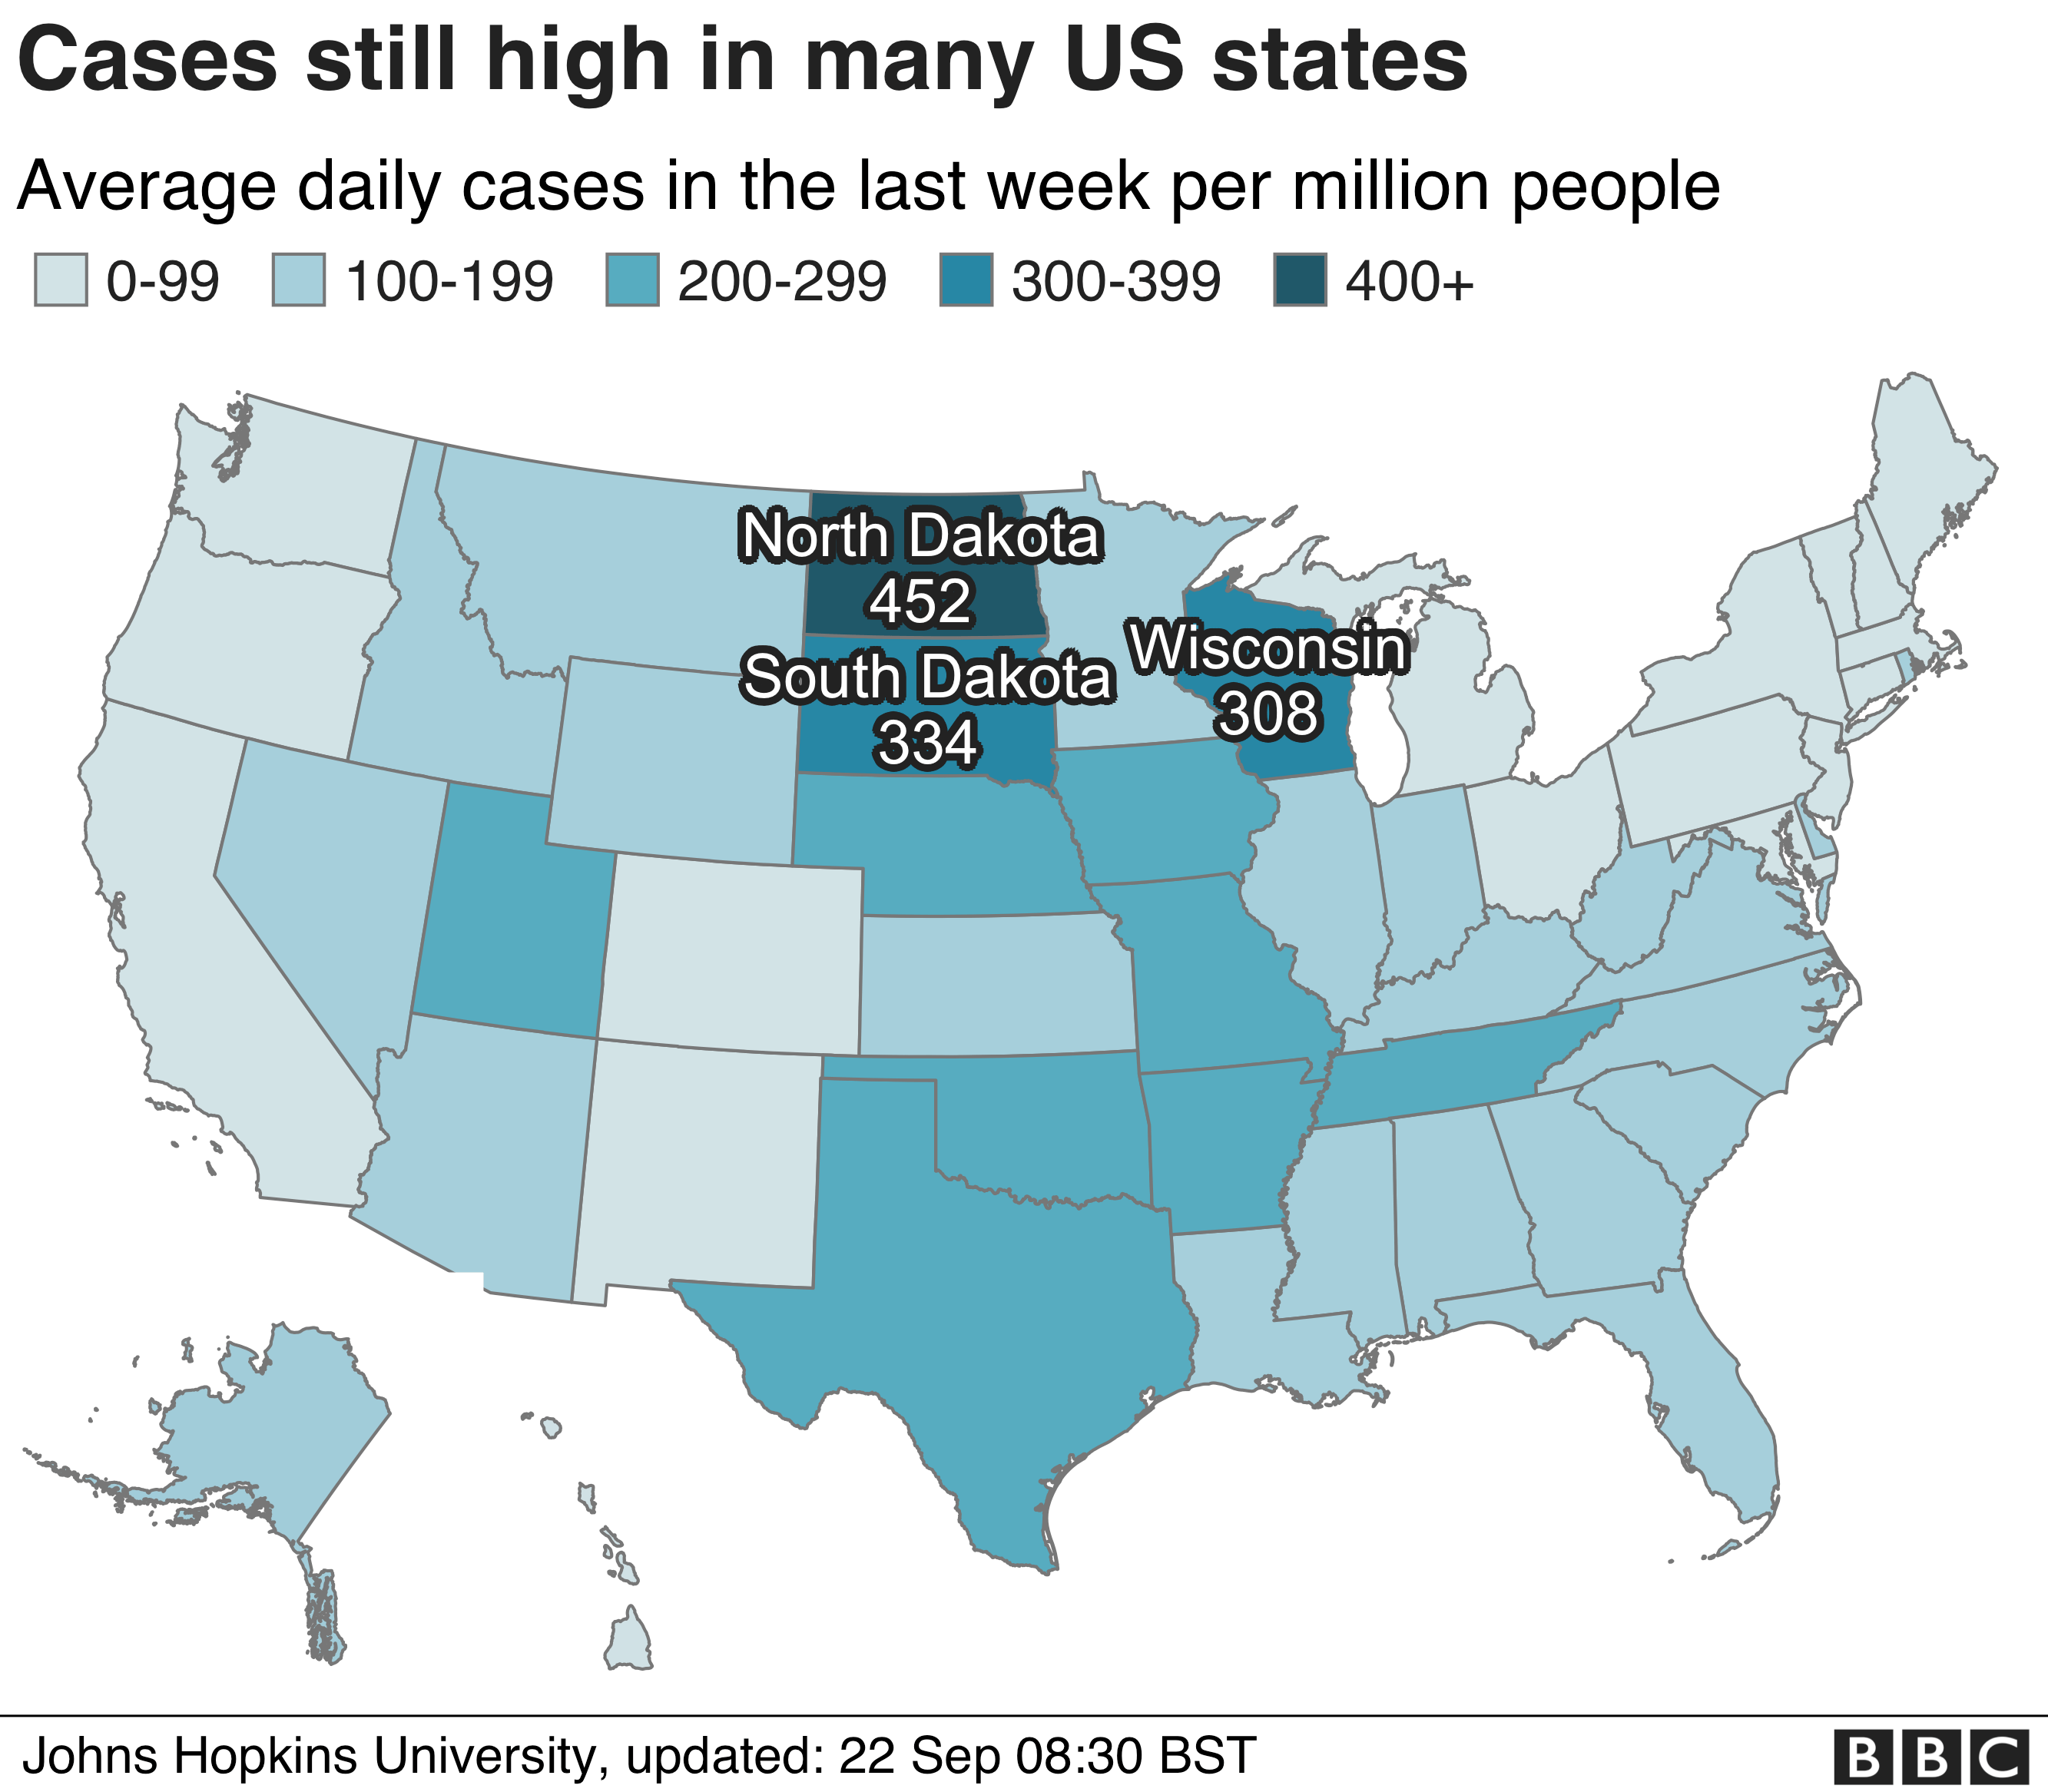 BBC map showing average daily cases in US states per million people in the last week